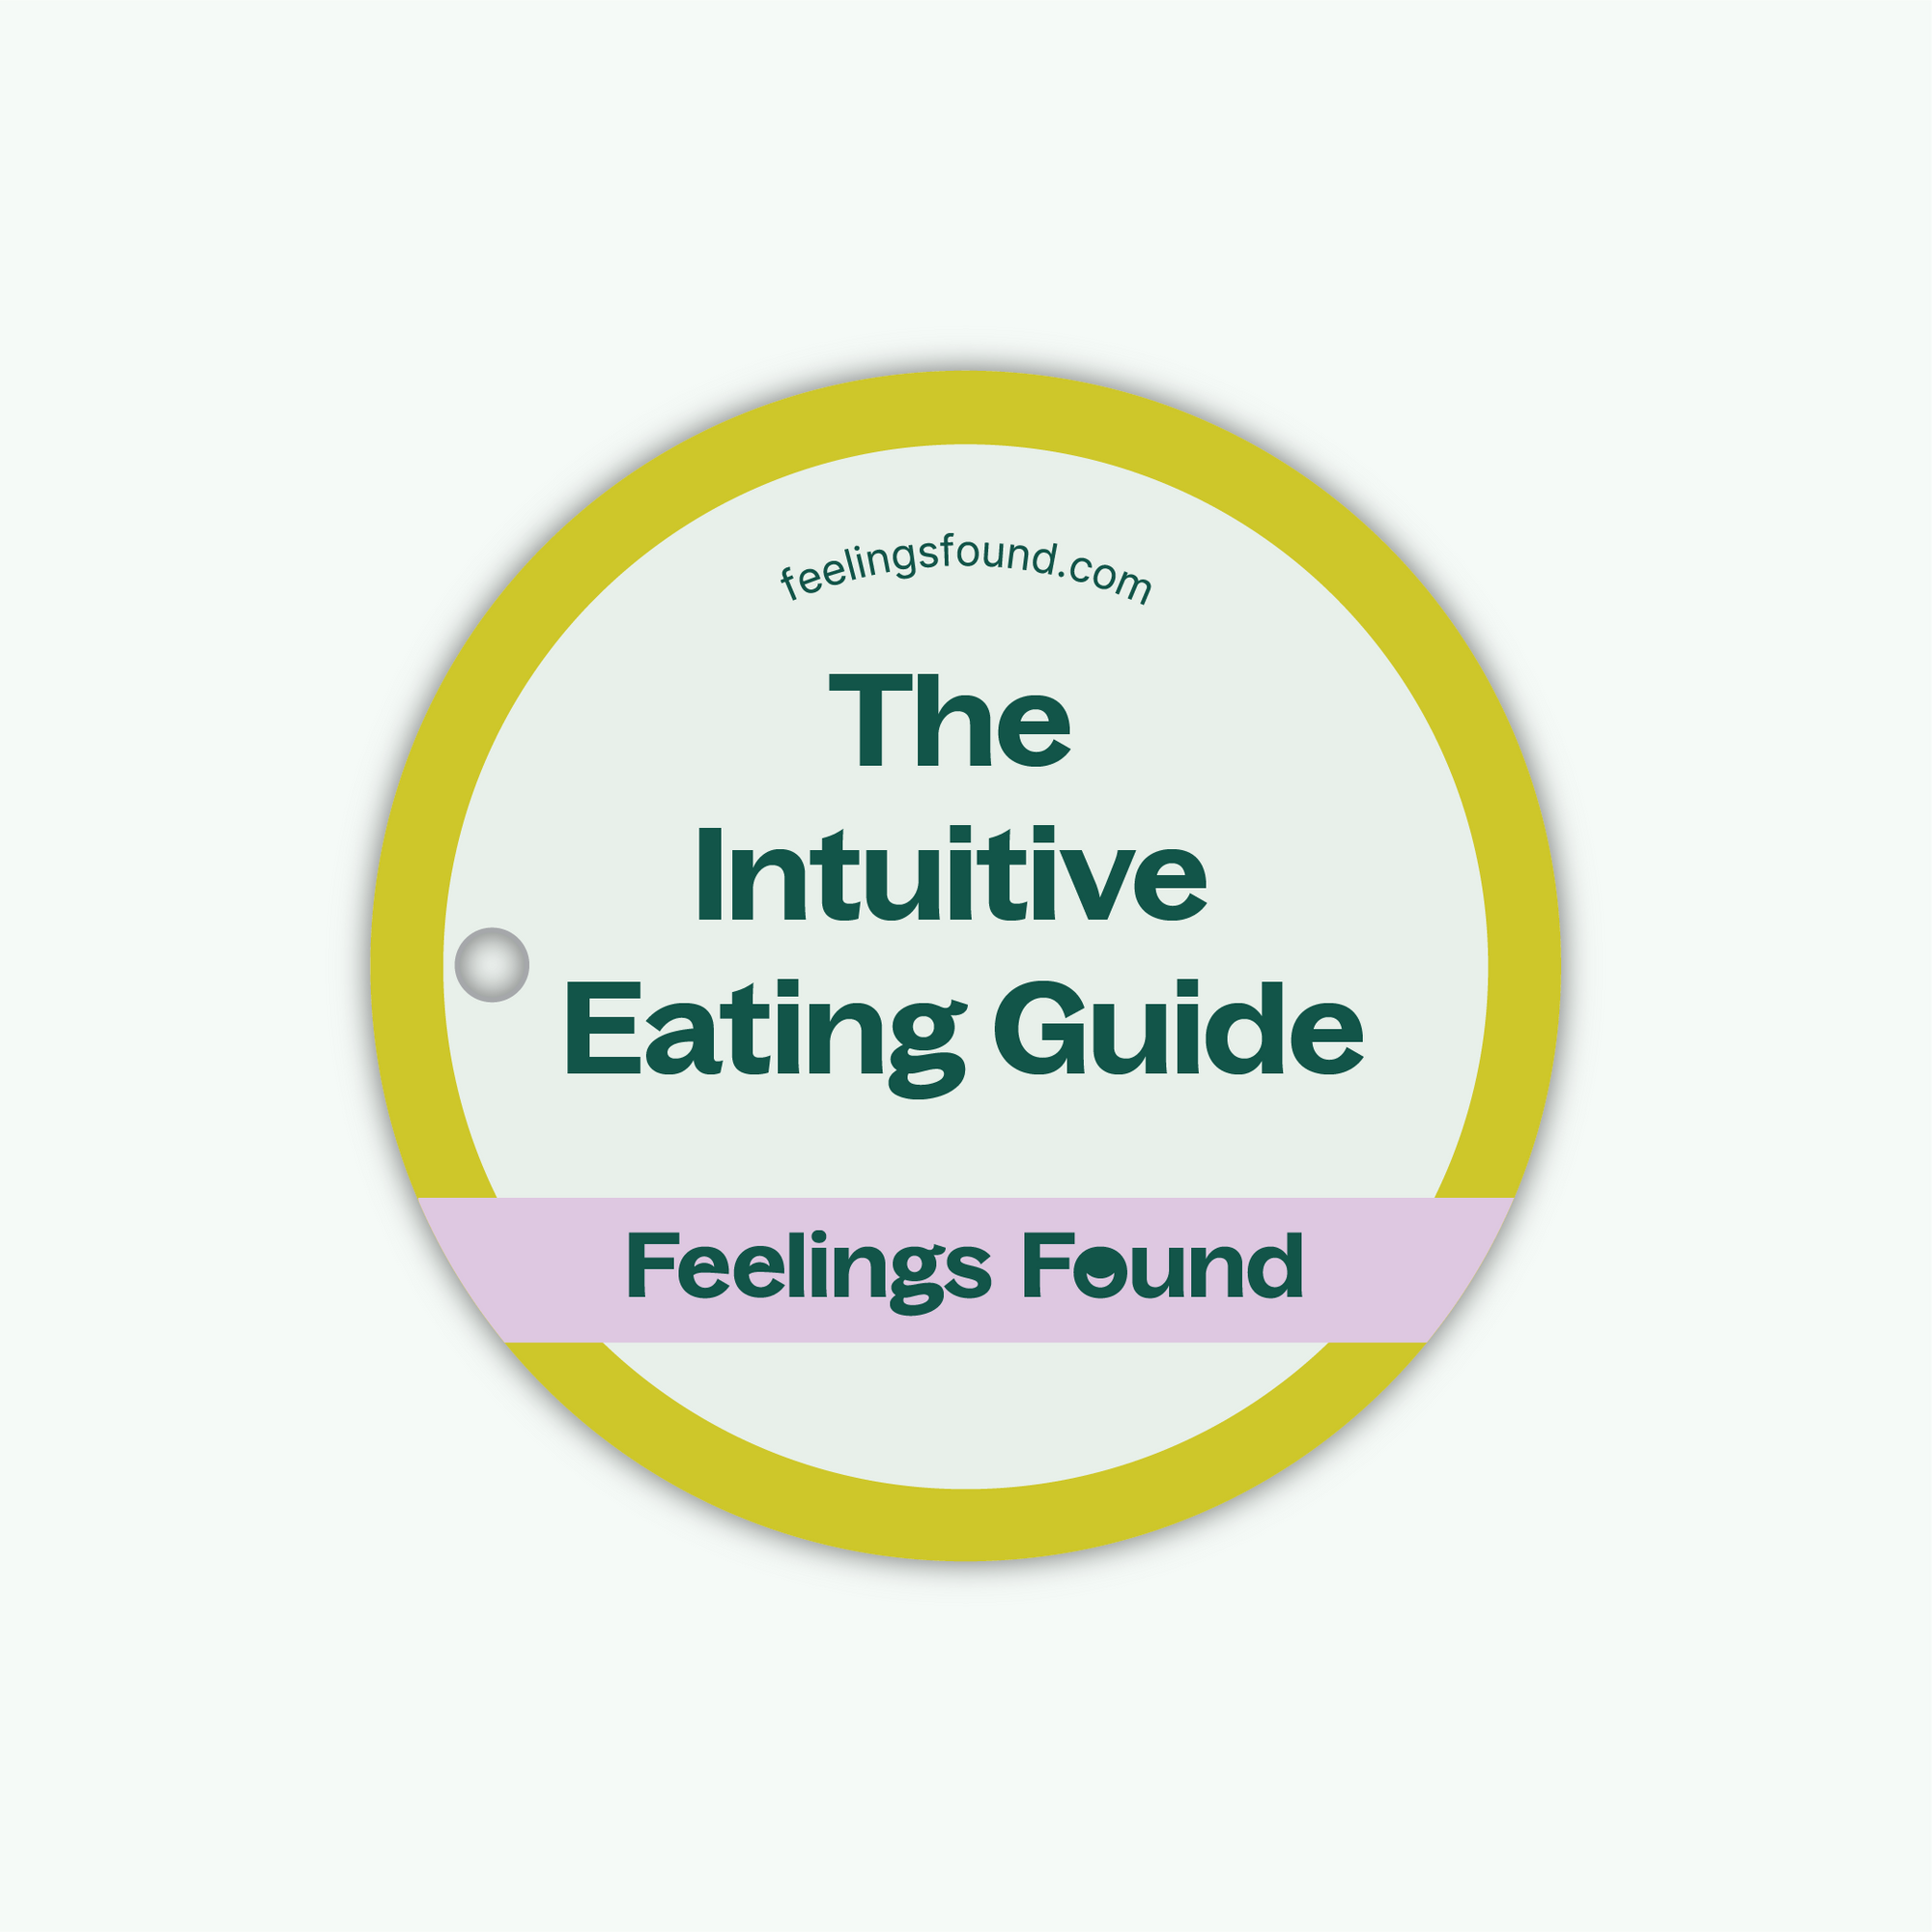 The Intuitive Eating Guide